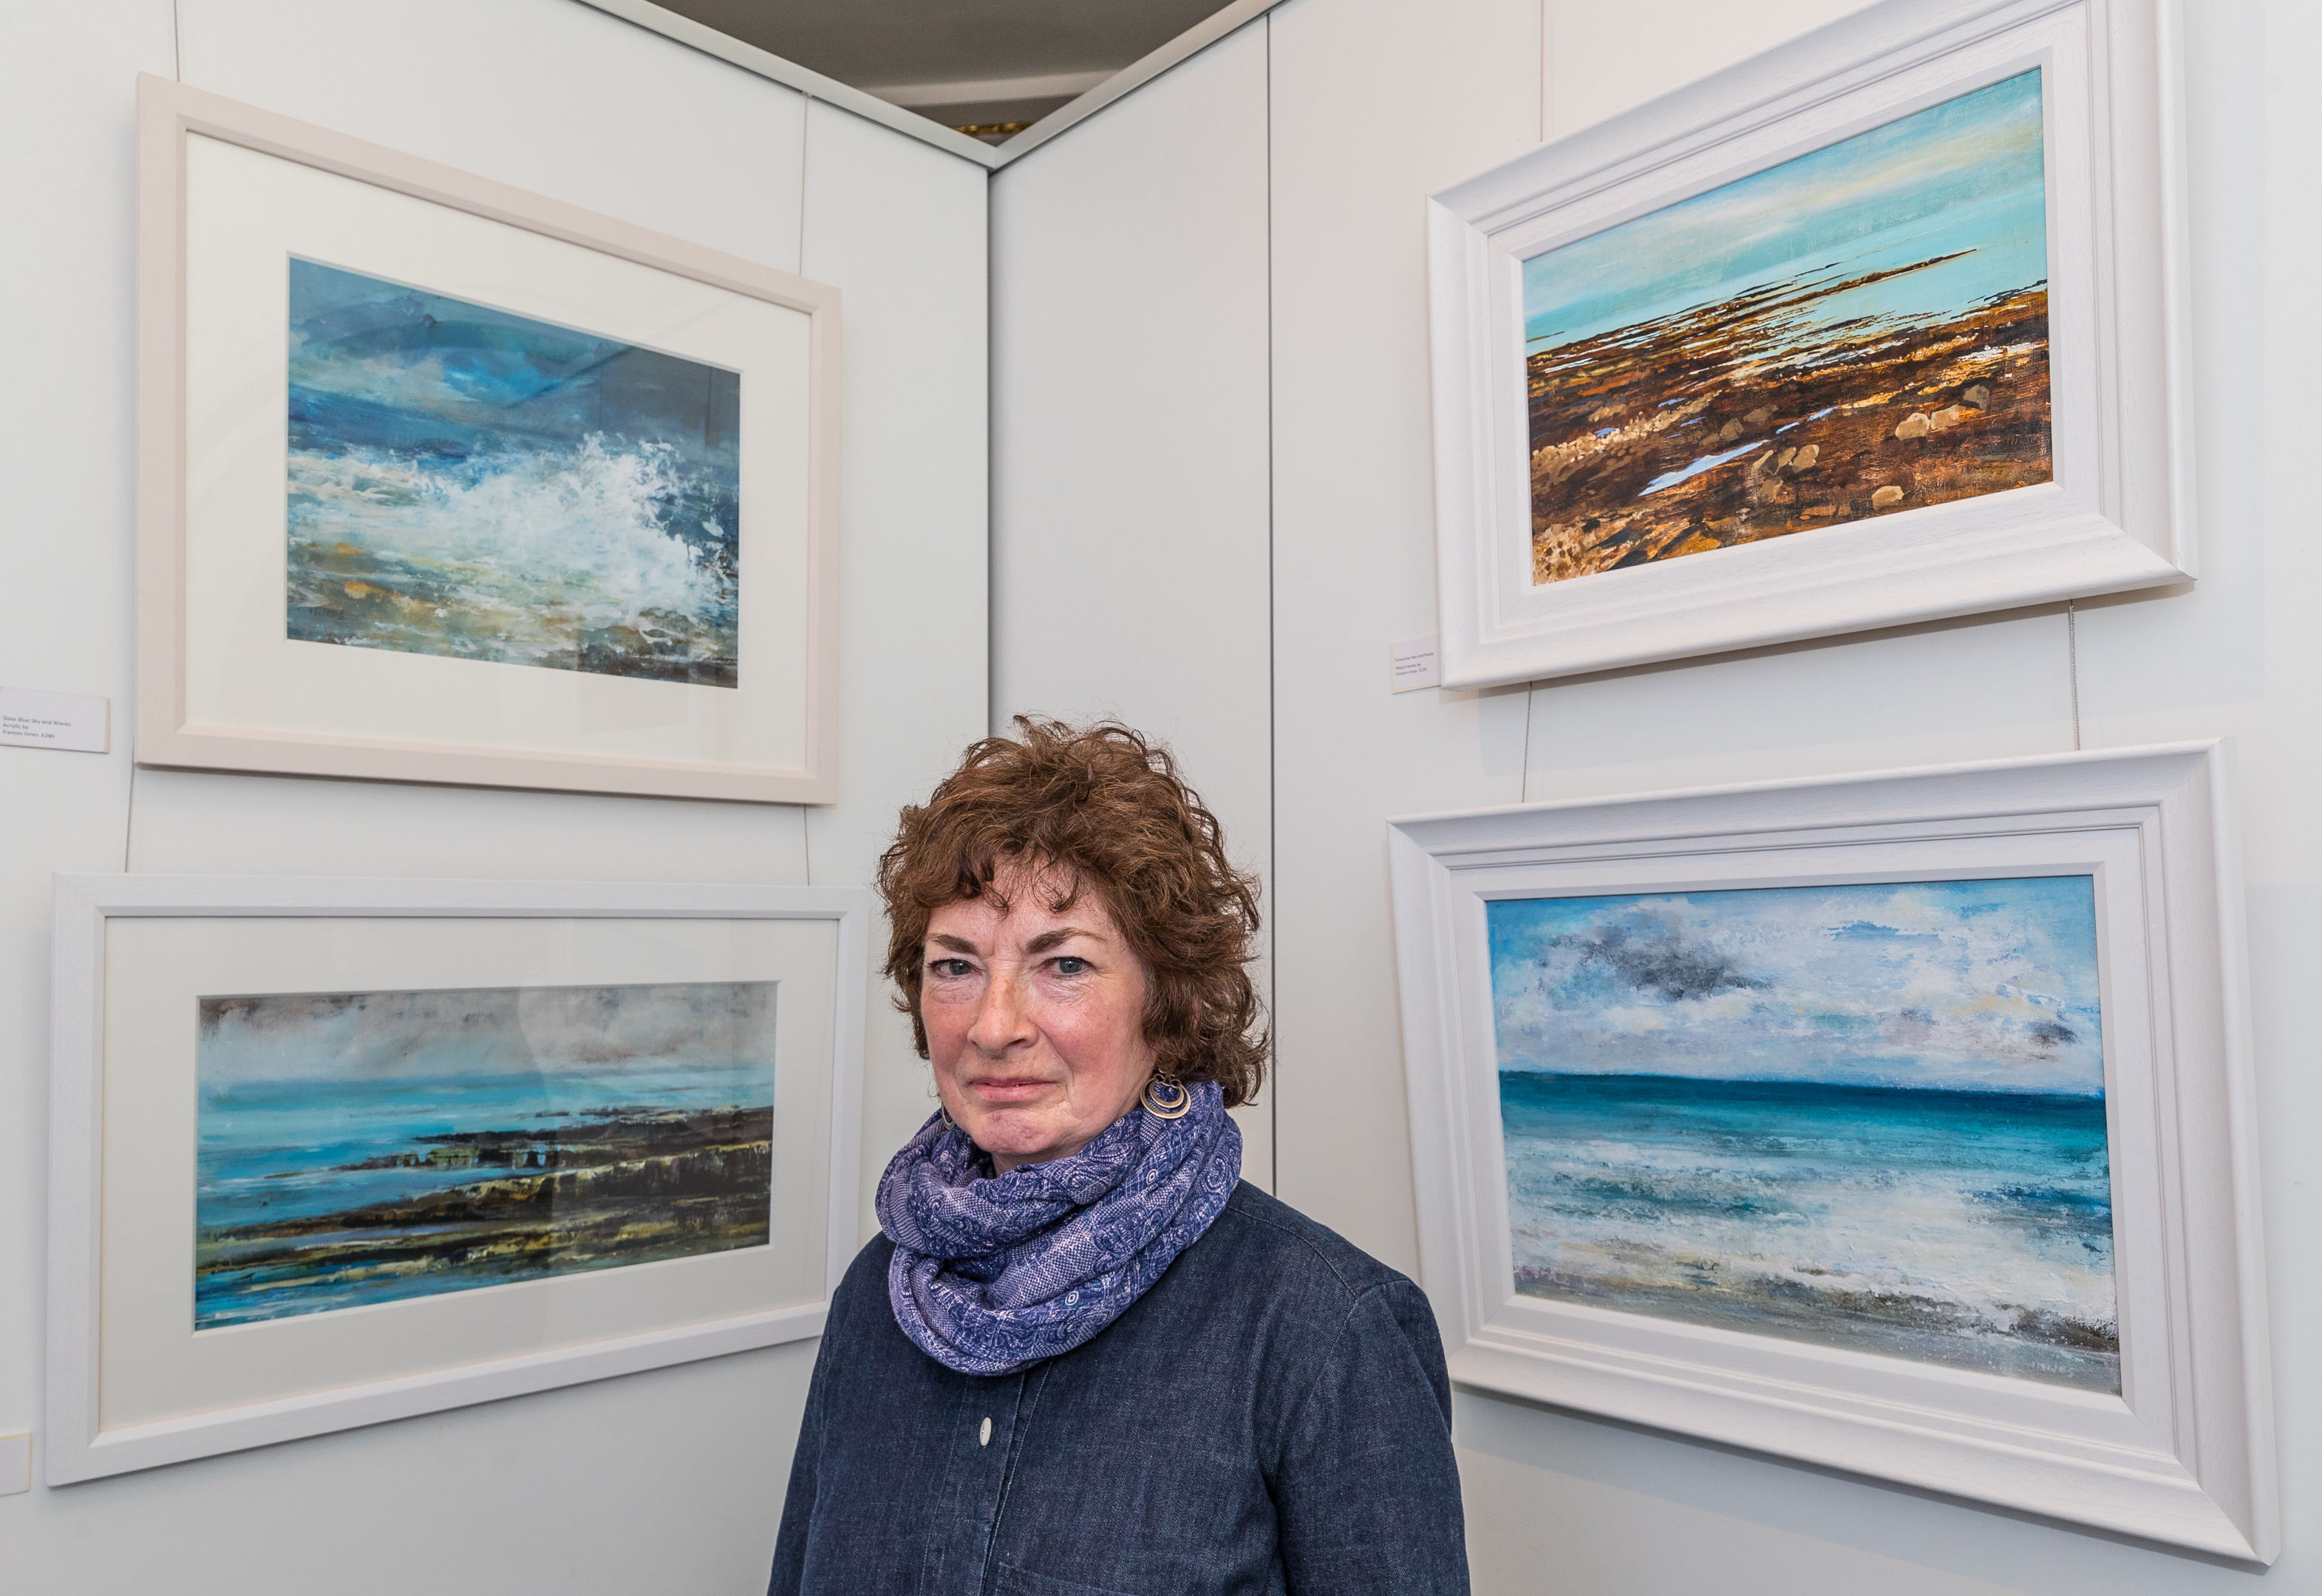 This is Frances Innes with some of her paintings on display at Elgin Museum, Moray on Friday 27 April 2018. Picture taken by Brian Smith T/A Jasperimage on 27 April 2018.